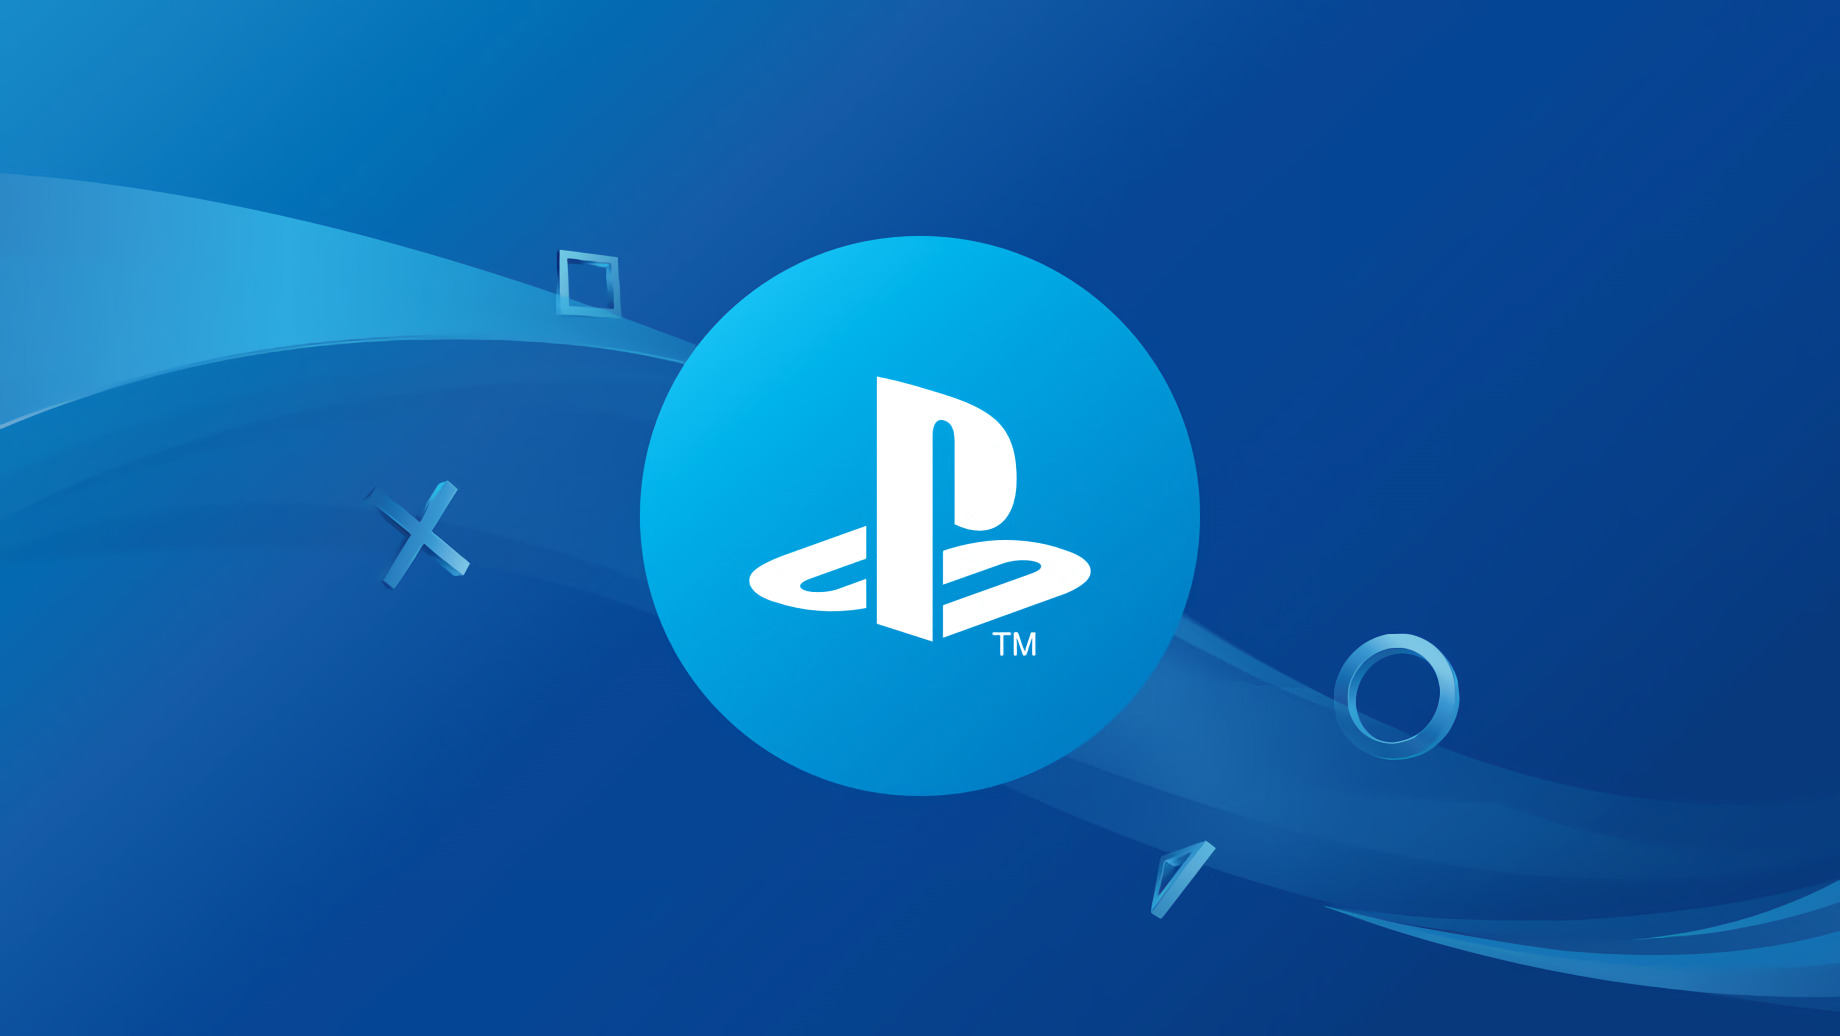 Playstation 5 network